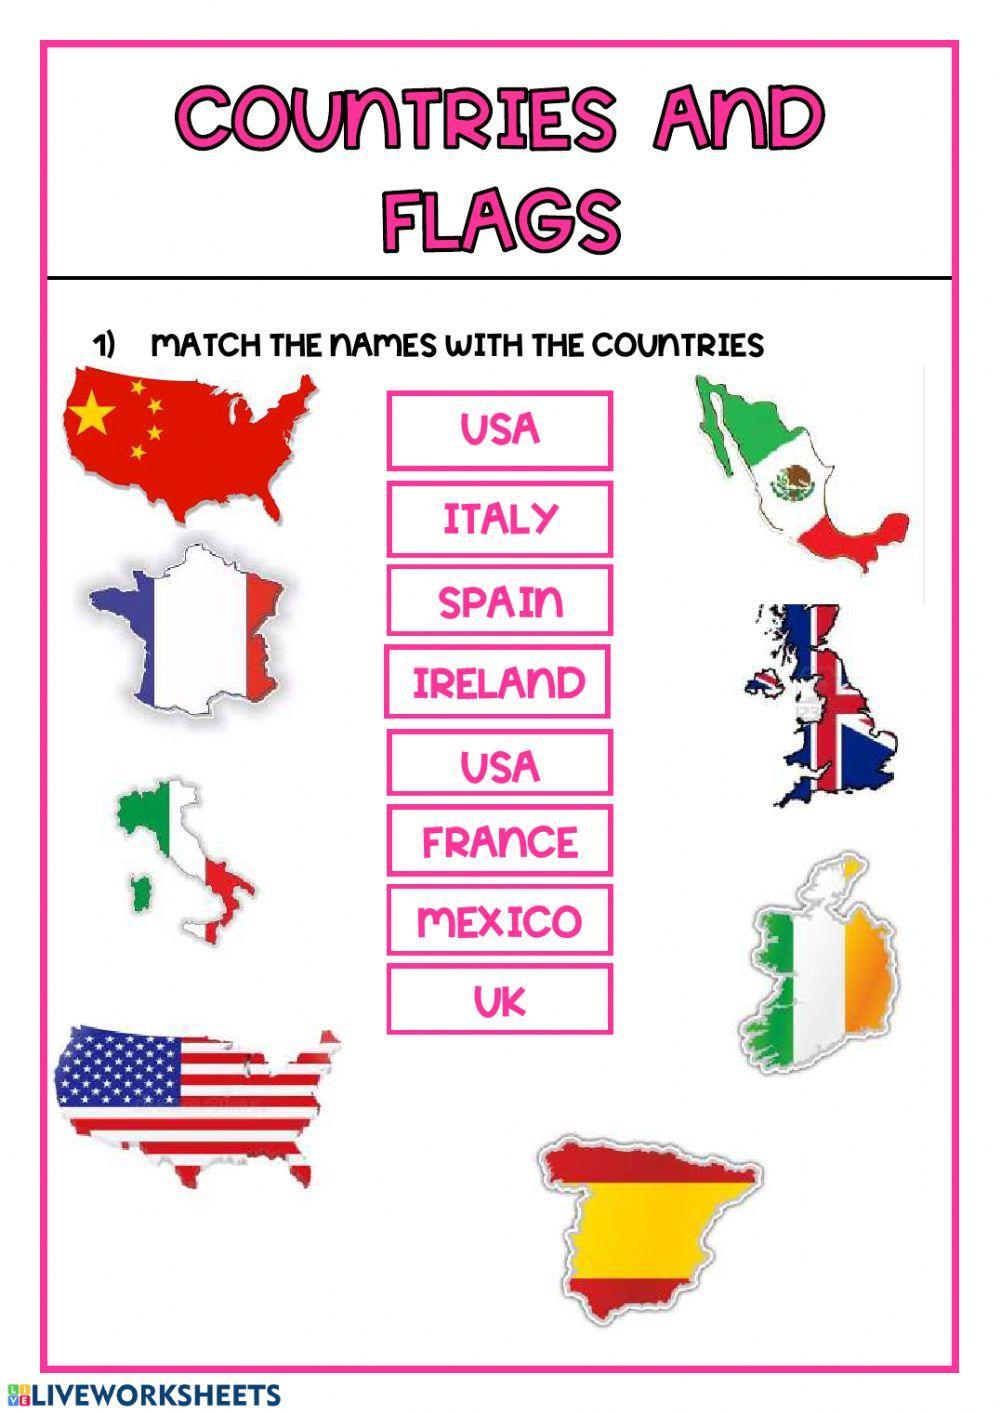 Flags and  countries